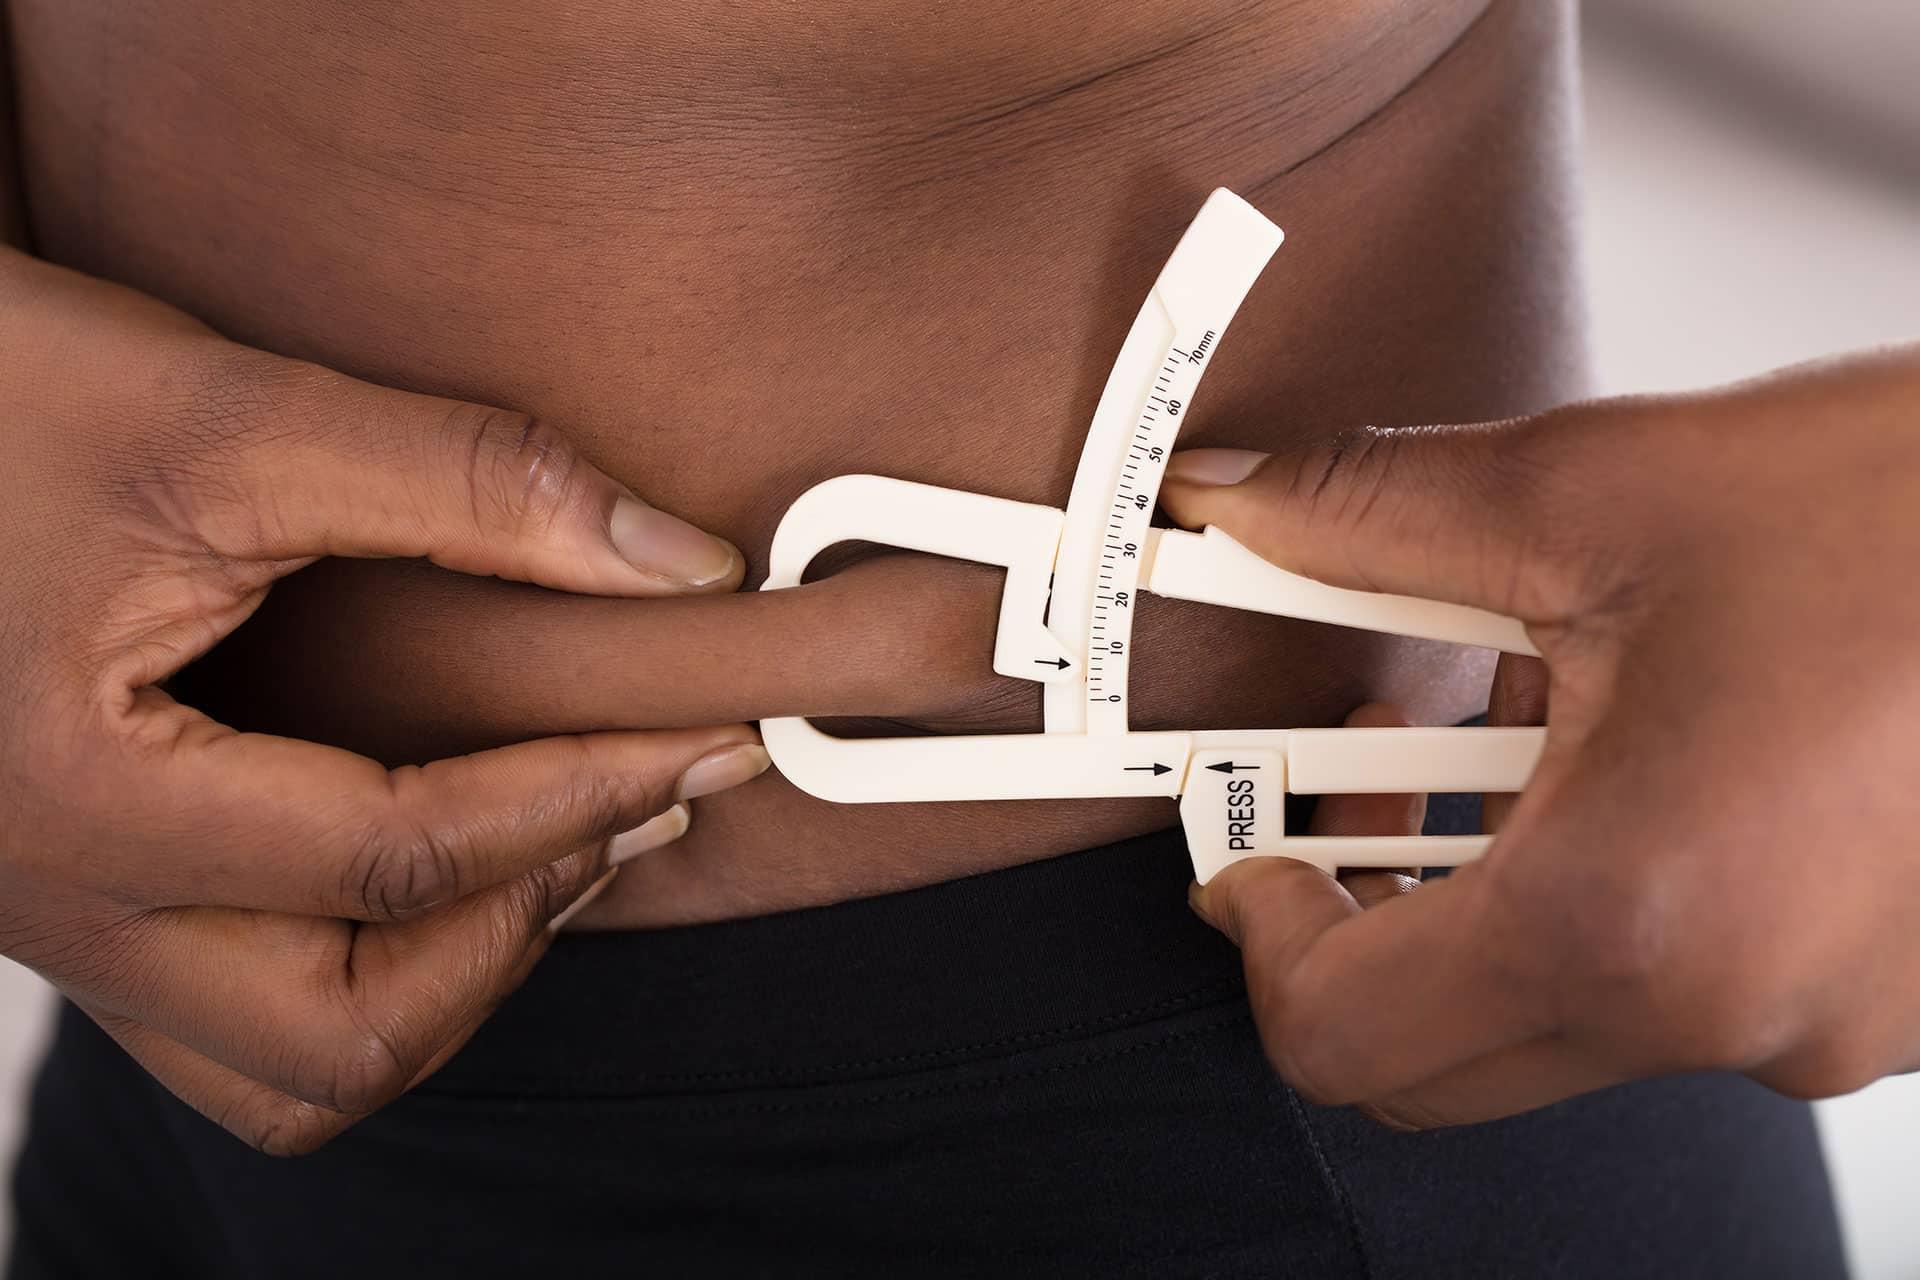 How To Measure Your Body Fat % Using Calipers